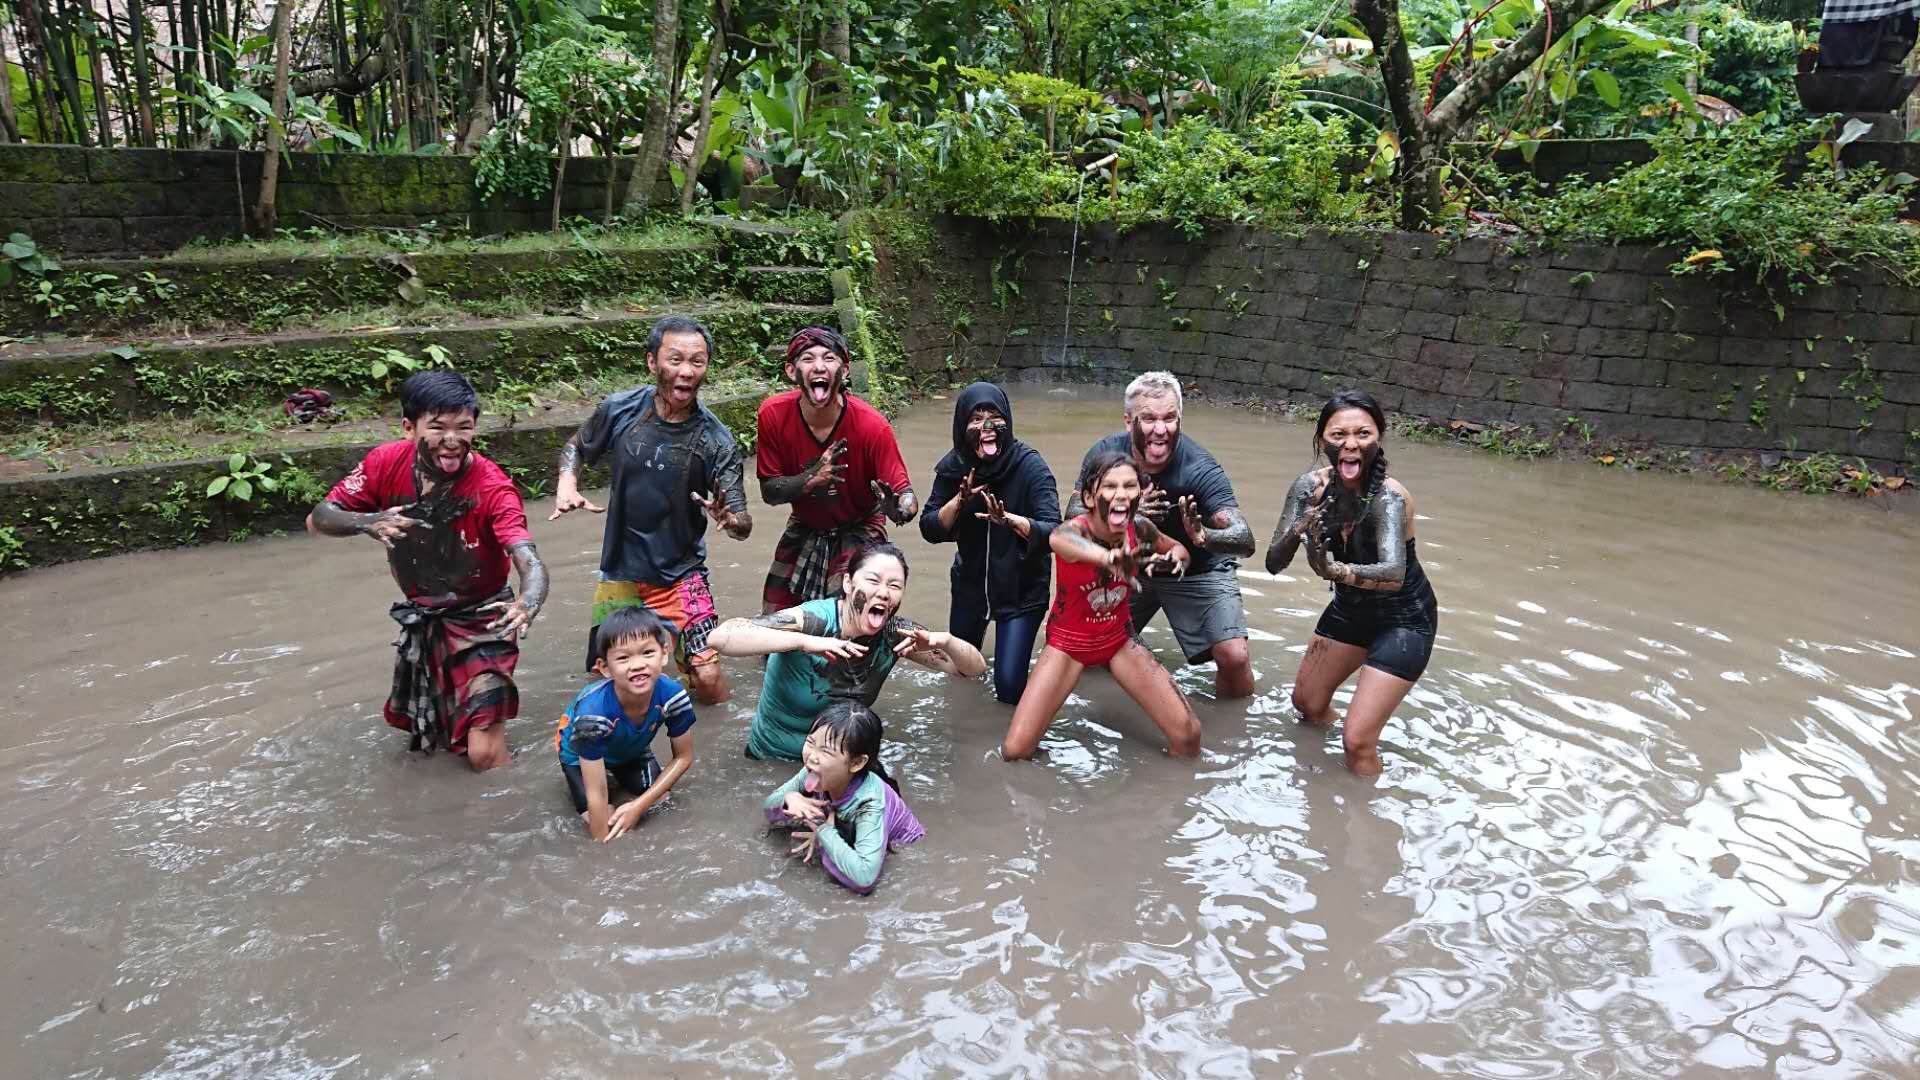 Cherry Chau’s son (front left) and her husband (behind) in a Balinese mud game with locals during their one-month stay in Indonesia. Photo: Handout